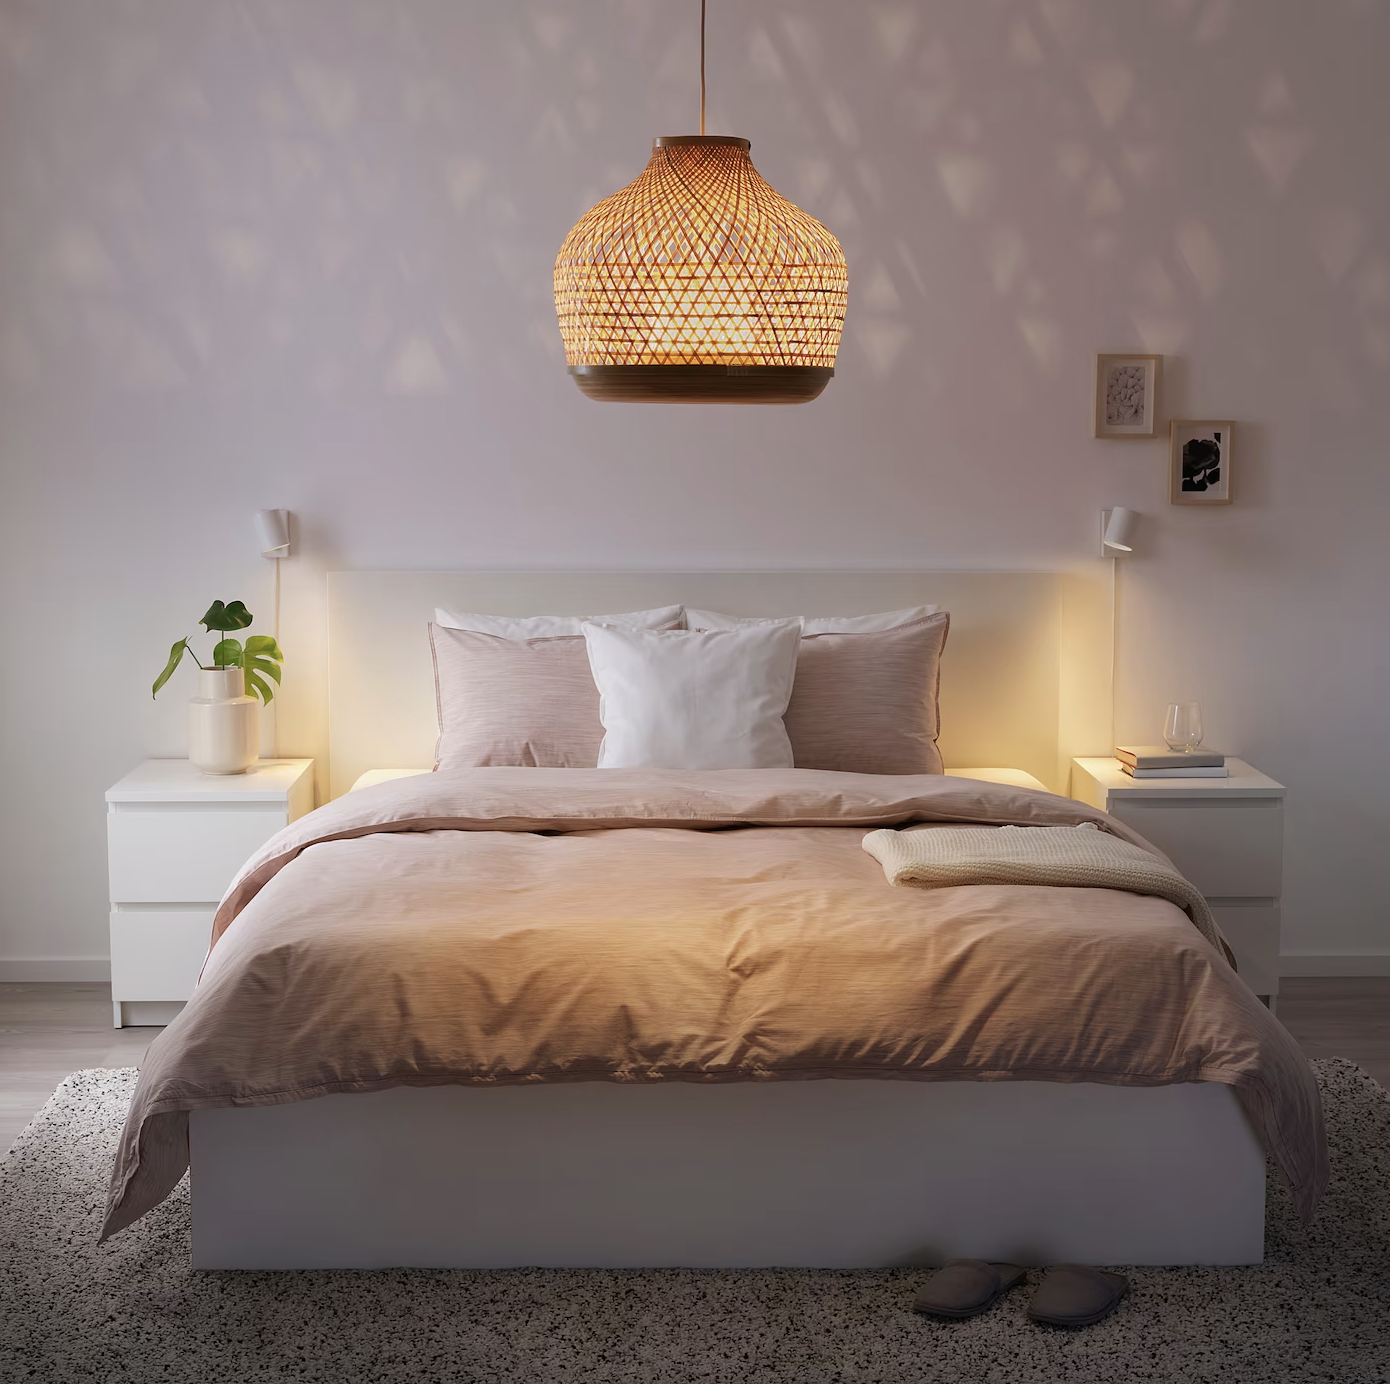 10 Best Bedroom Mood Lighting Ideas 2023 You Cant Go Wrong With